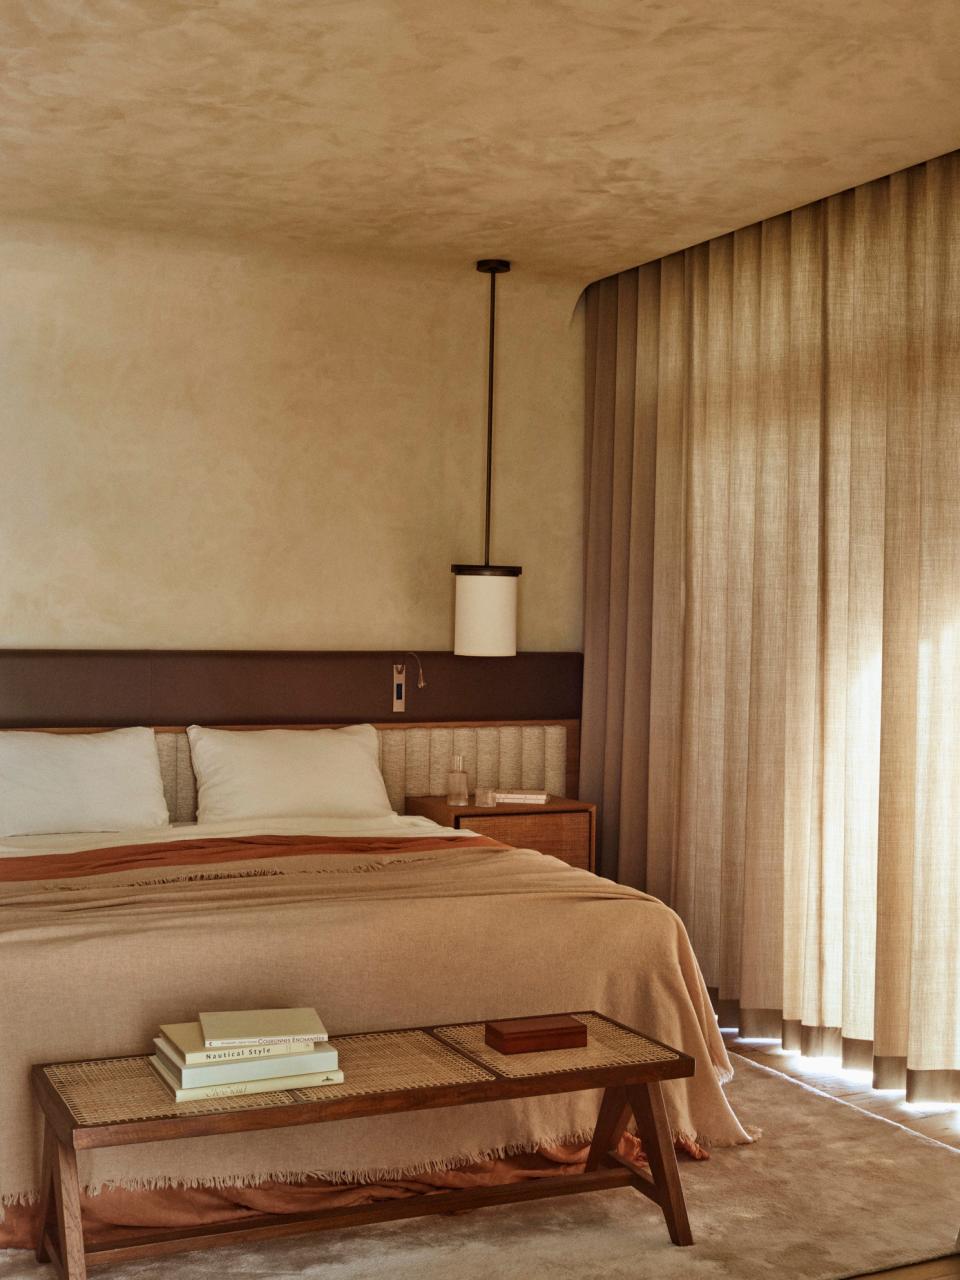 The primary bedroom features a headboard and nightstands by Caprini & Pellerin Architectes and a brass reading light by Meljac. The vintage Chandigarh bench is by Le Corbusier and Pierre Jeanneret. The curtains are Pierre Frey.